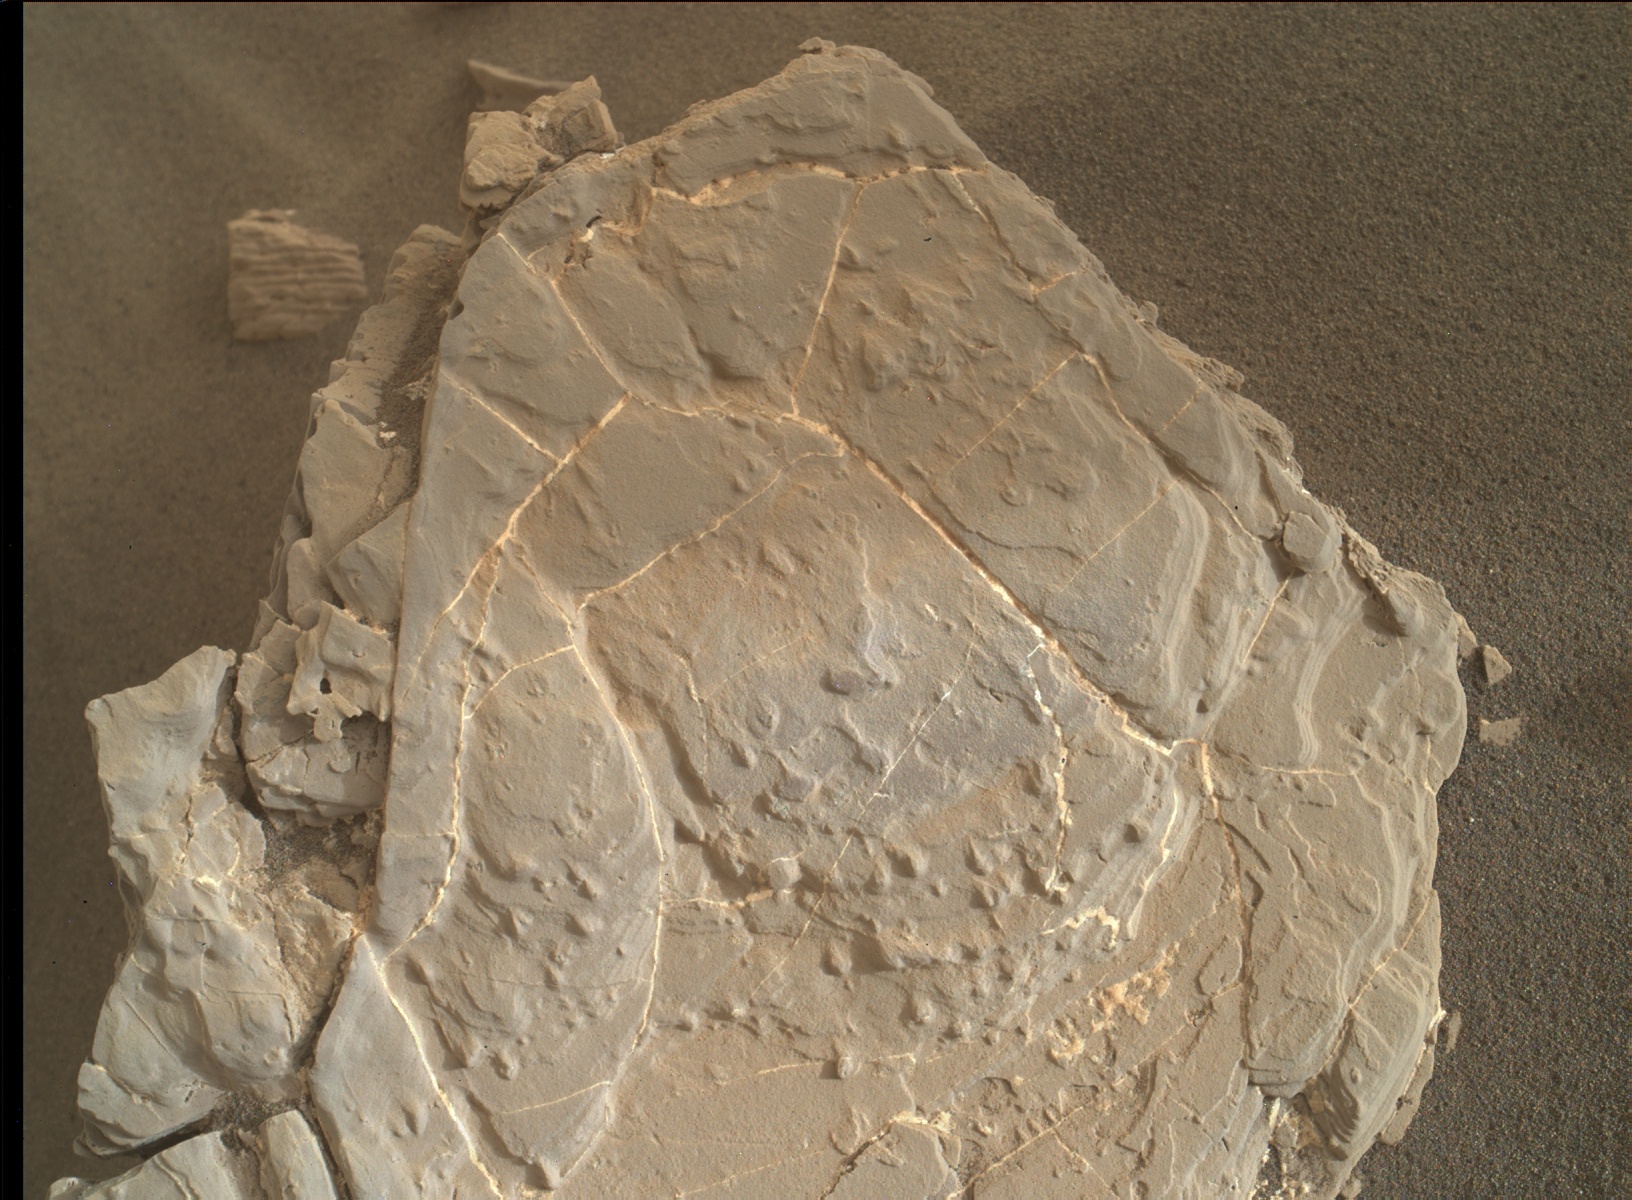 Nasa's Mars rover Curiosity acquired this image using its Mars Hand Lens Imager (MAHLI) on Sol 1927